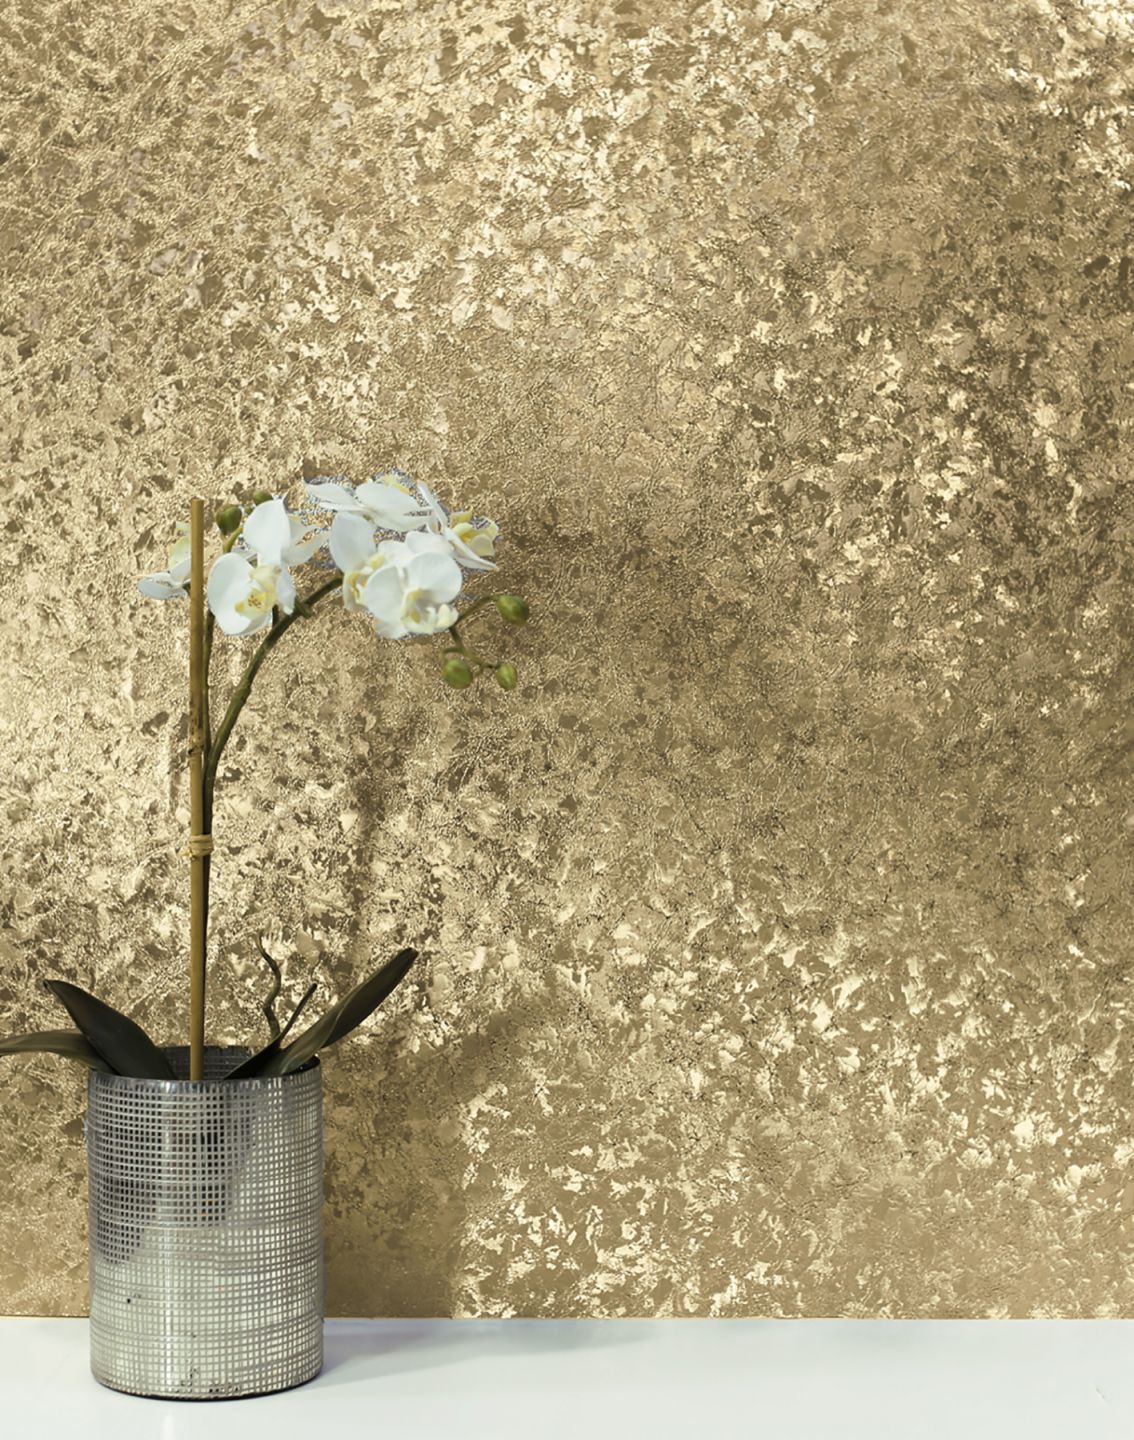 A shiny gold-coloured metal wallpaper on the wall behind a vase with a white orchid